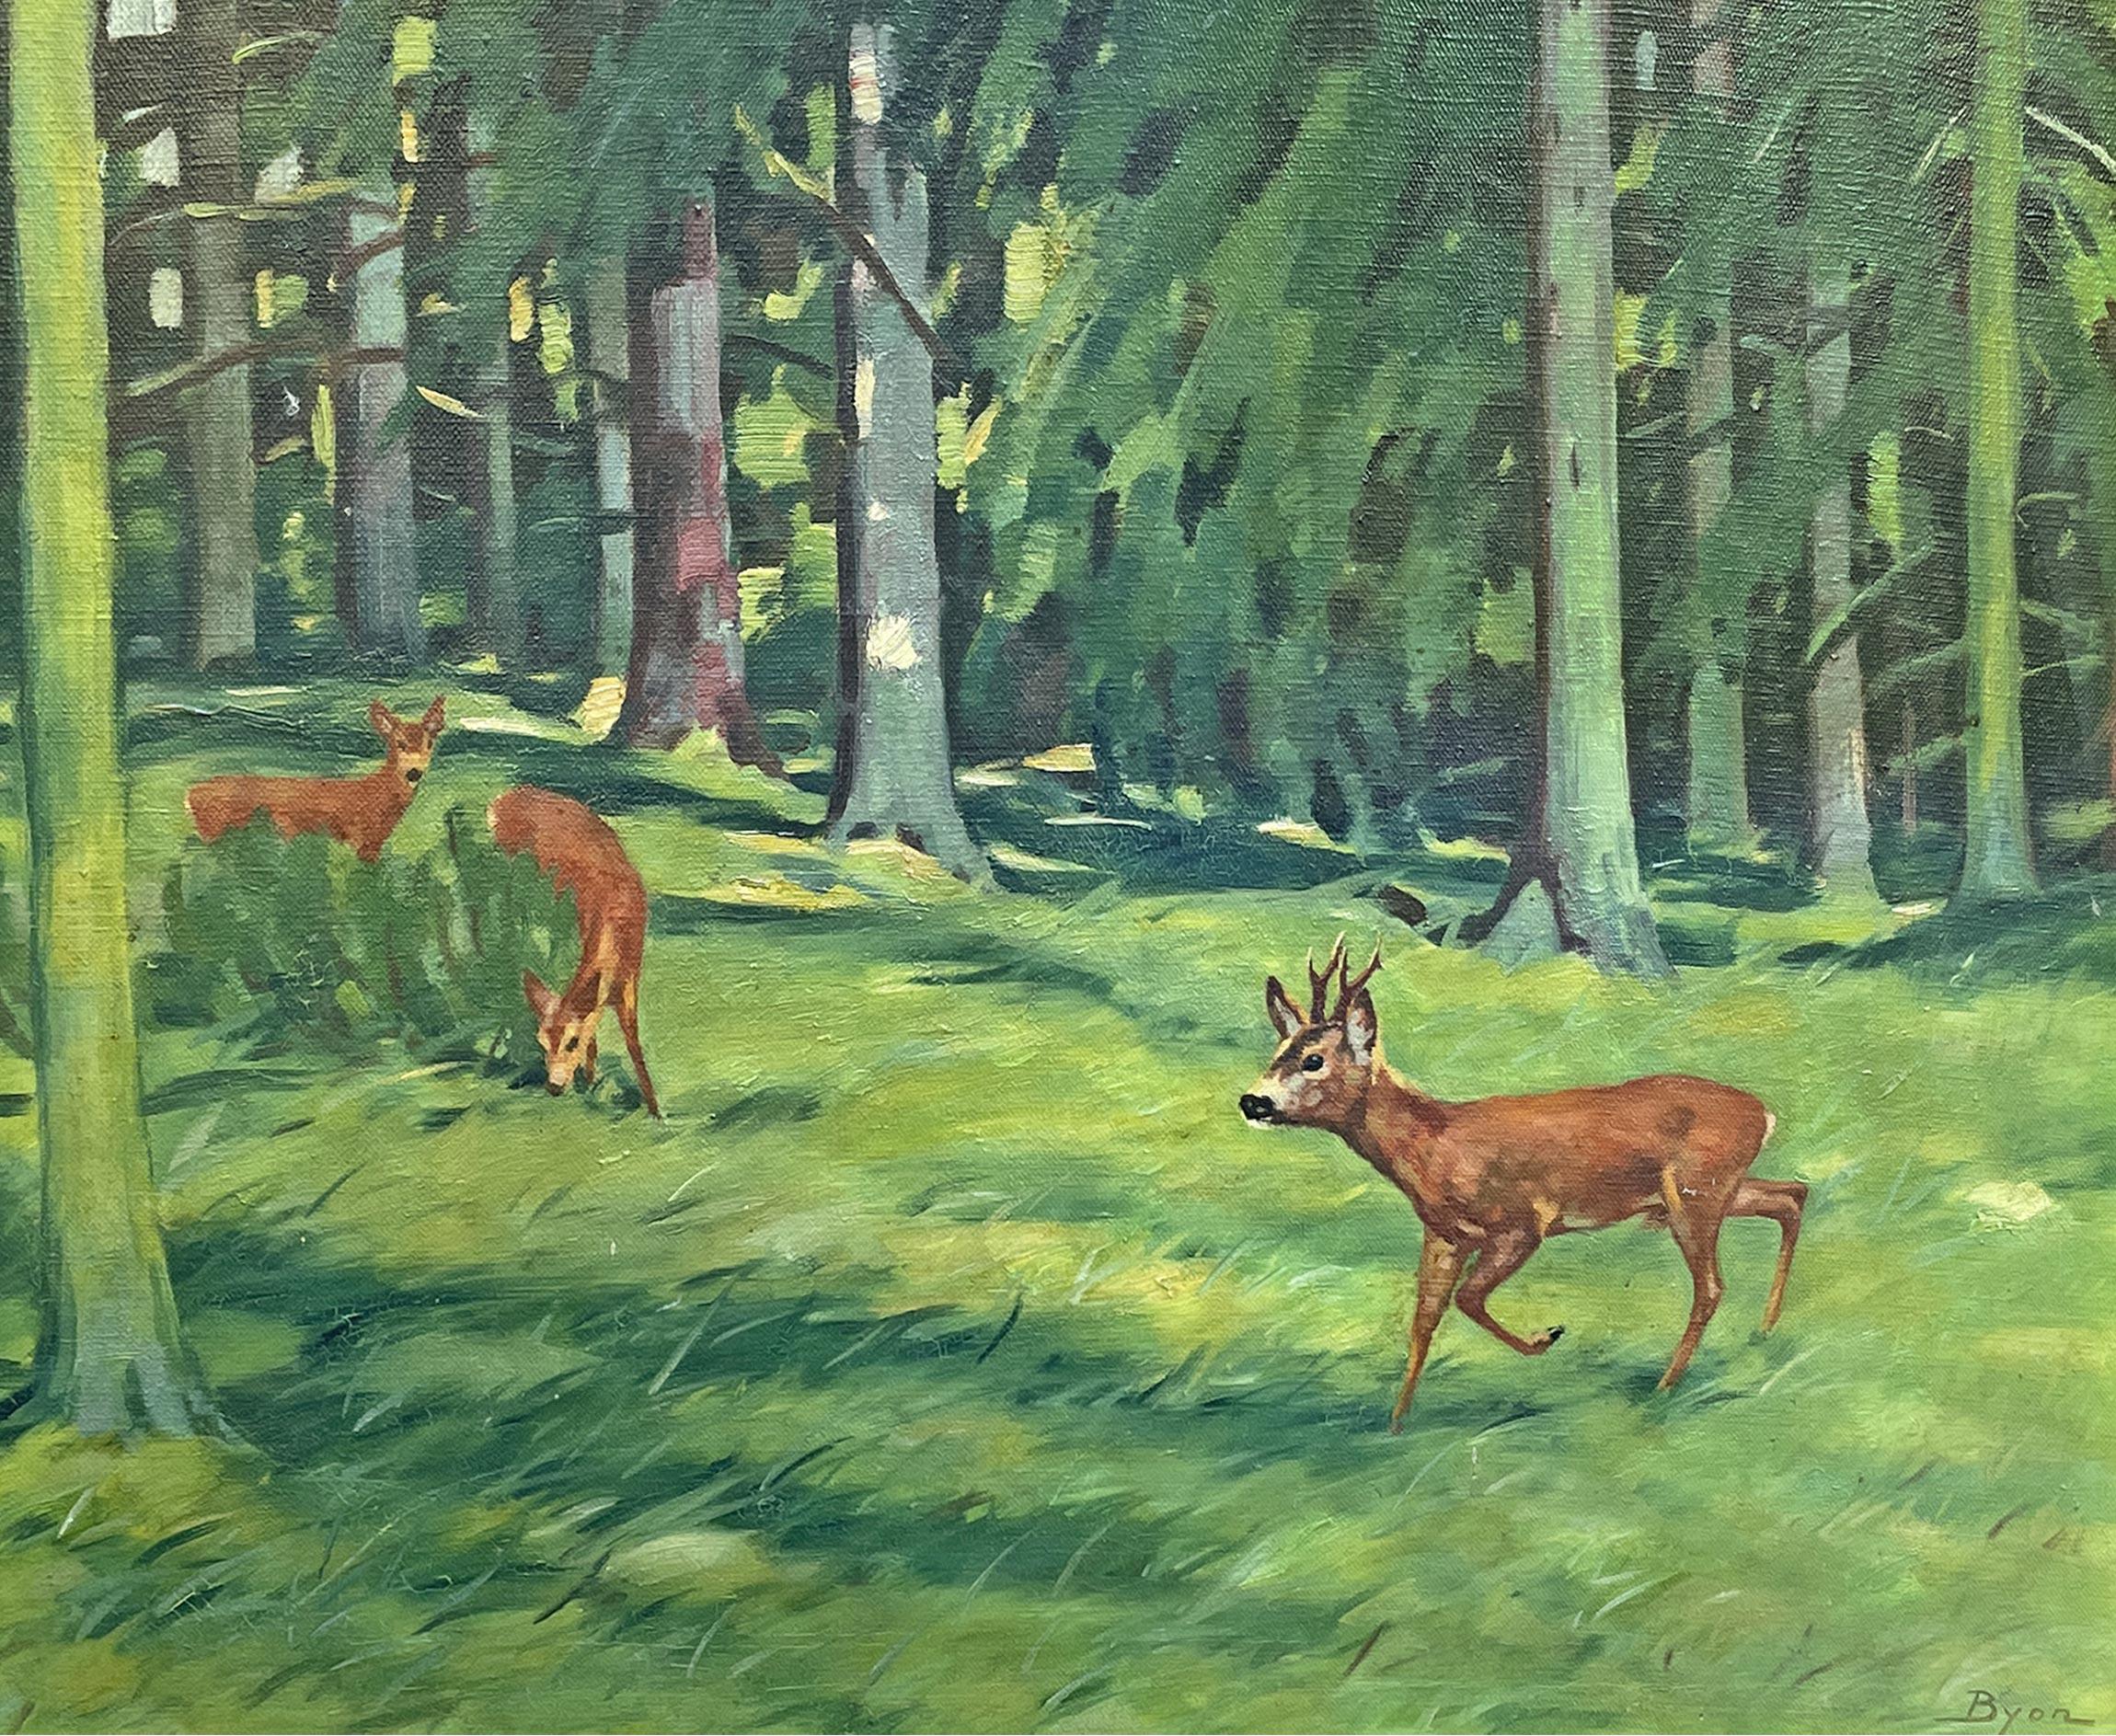 Roe deer in the wood – Constant Freiher Byon (1882 – ?)

47 cm x 57 cm (dimensions referring to the painting only)
58cm x 68cm – including frame
Oil on canvas – early 1900s

A young male roe deer is on the move in the woods in the middle of